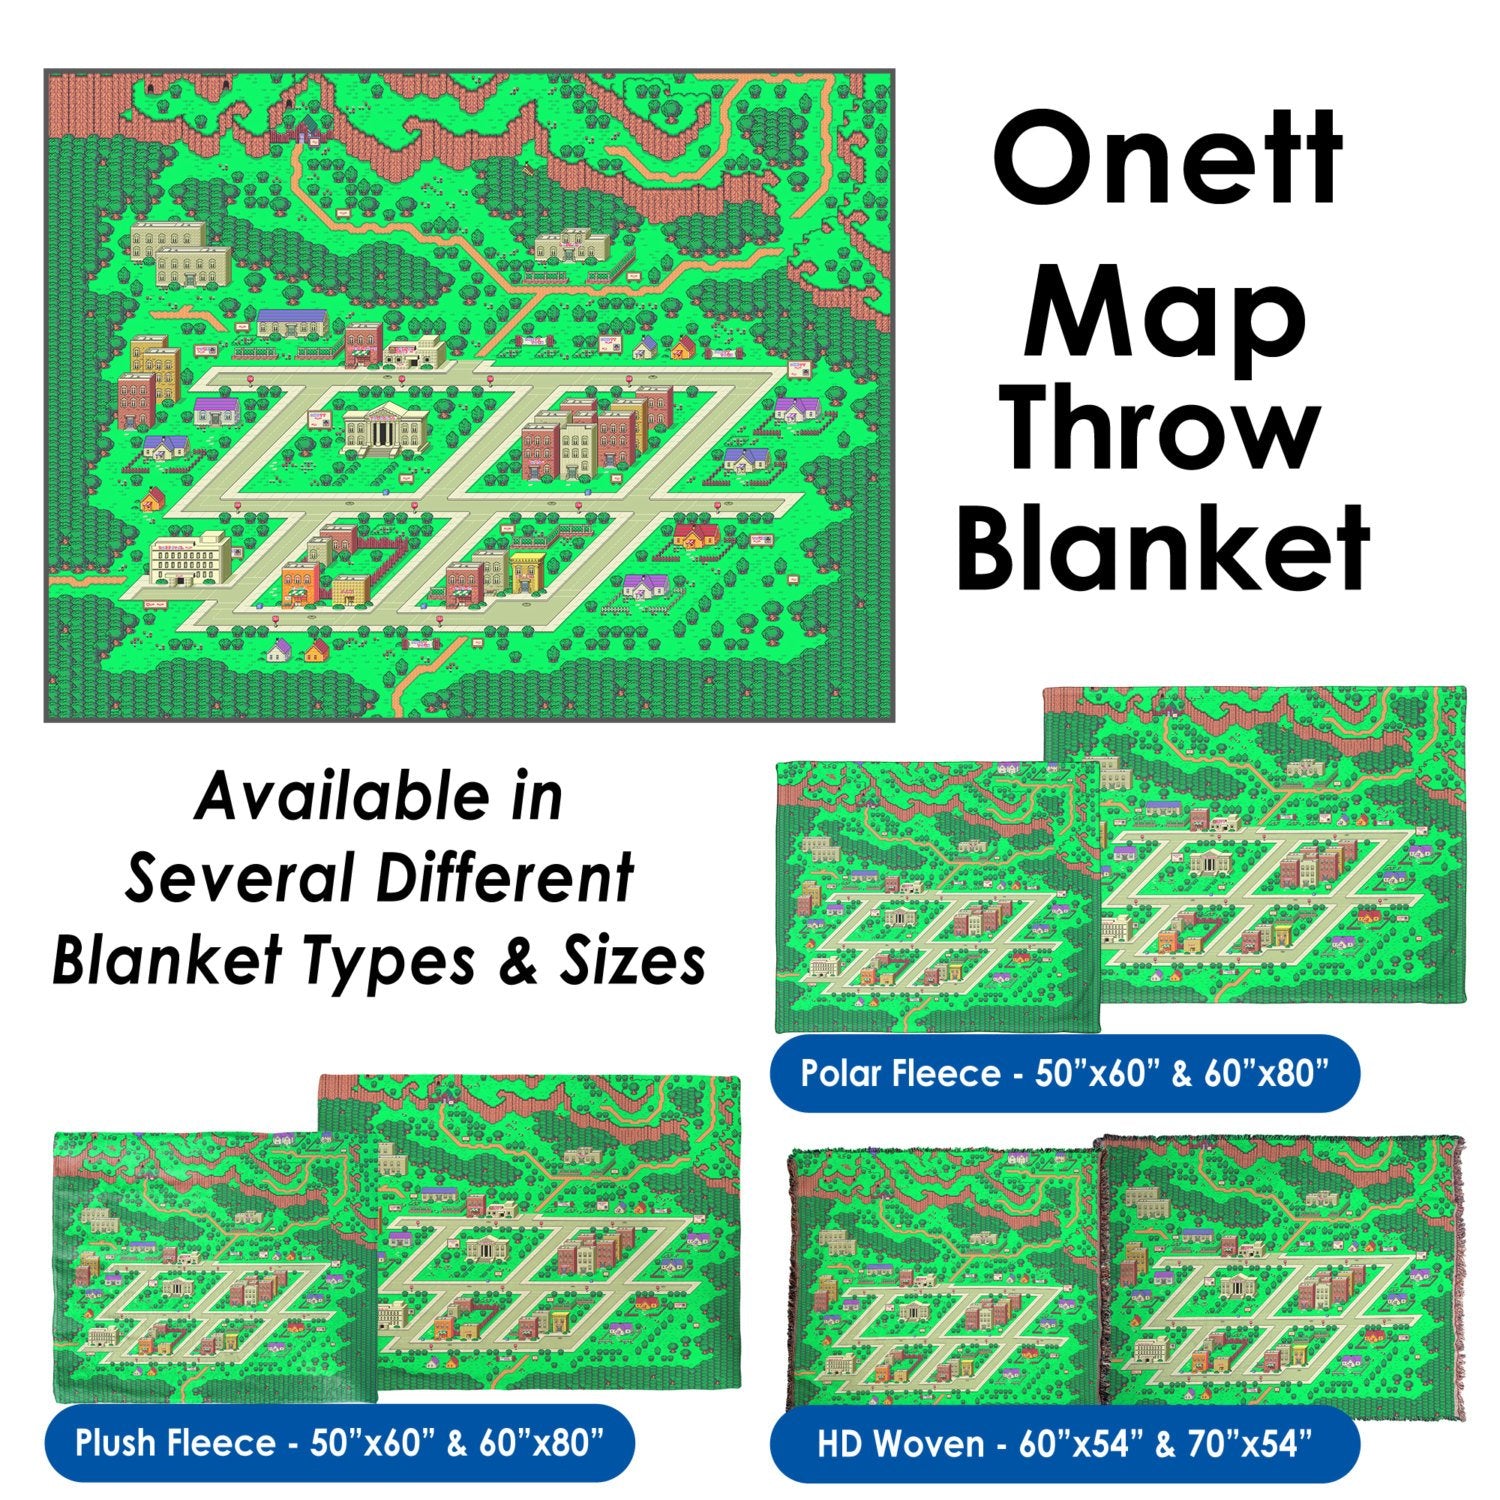 EarthBound, Onett Map - Throw Blanket / Tapestry Wall Hanging